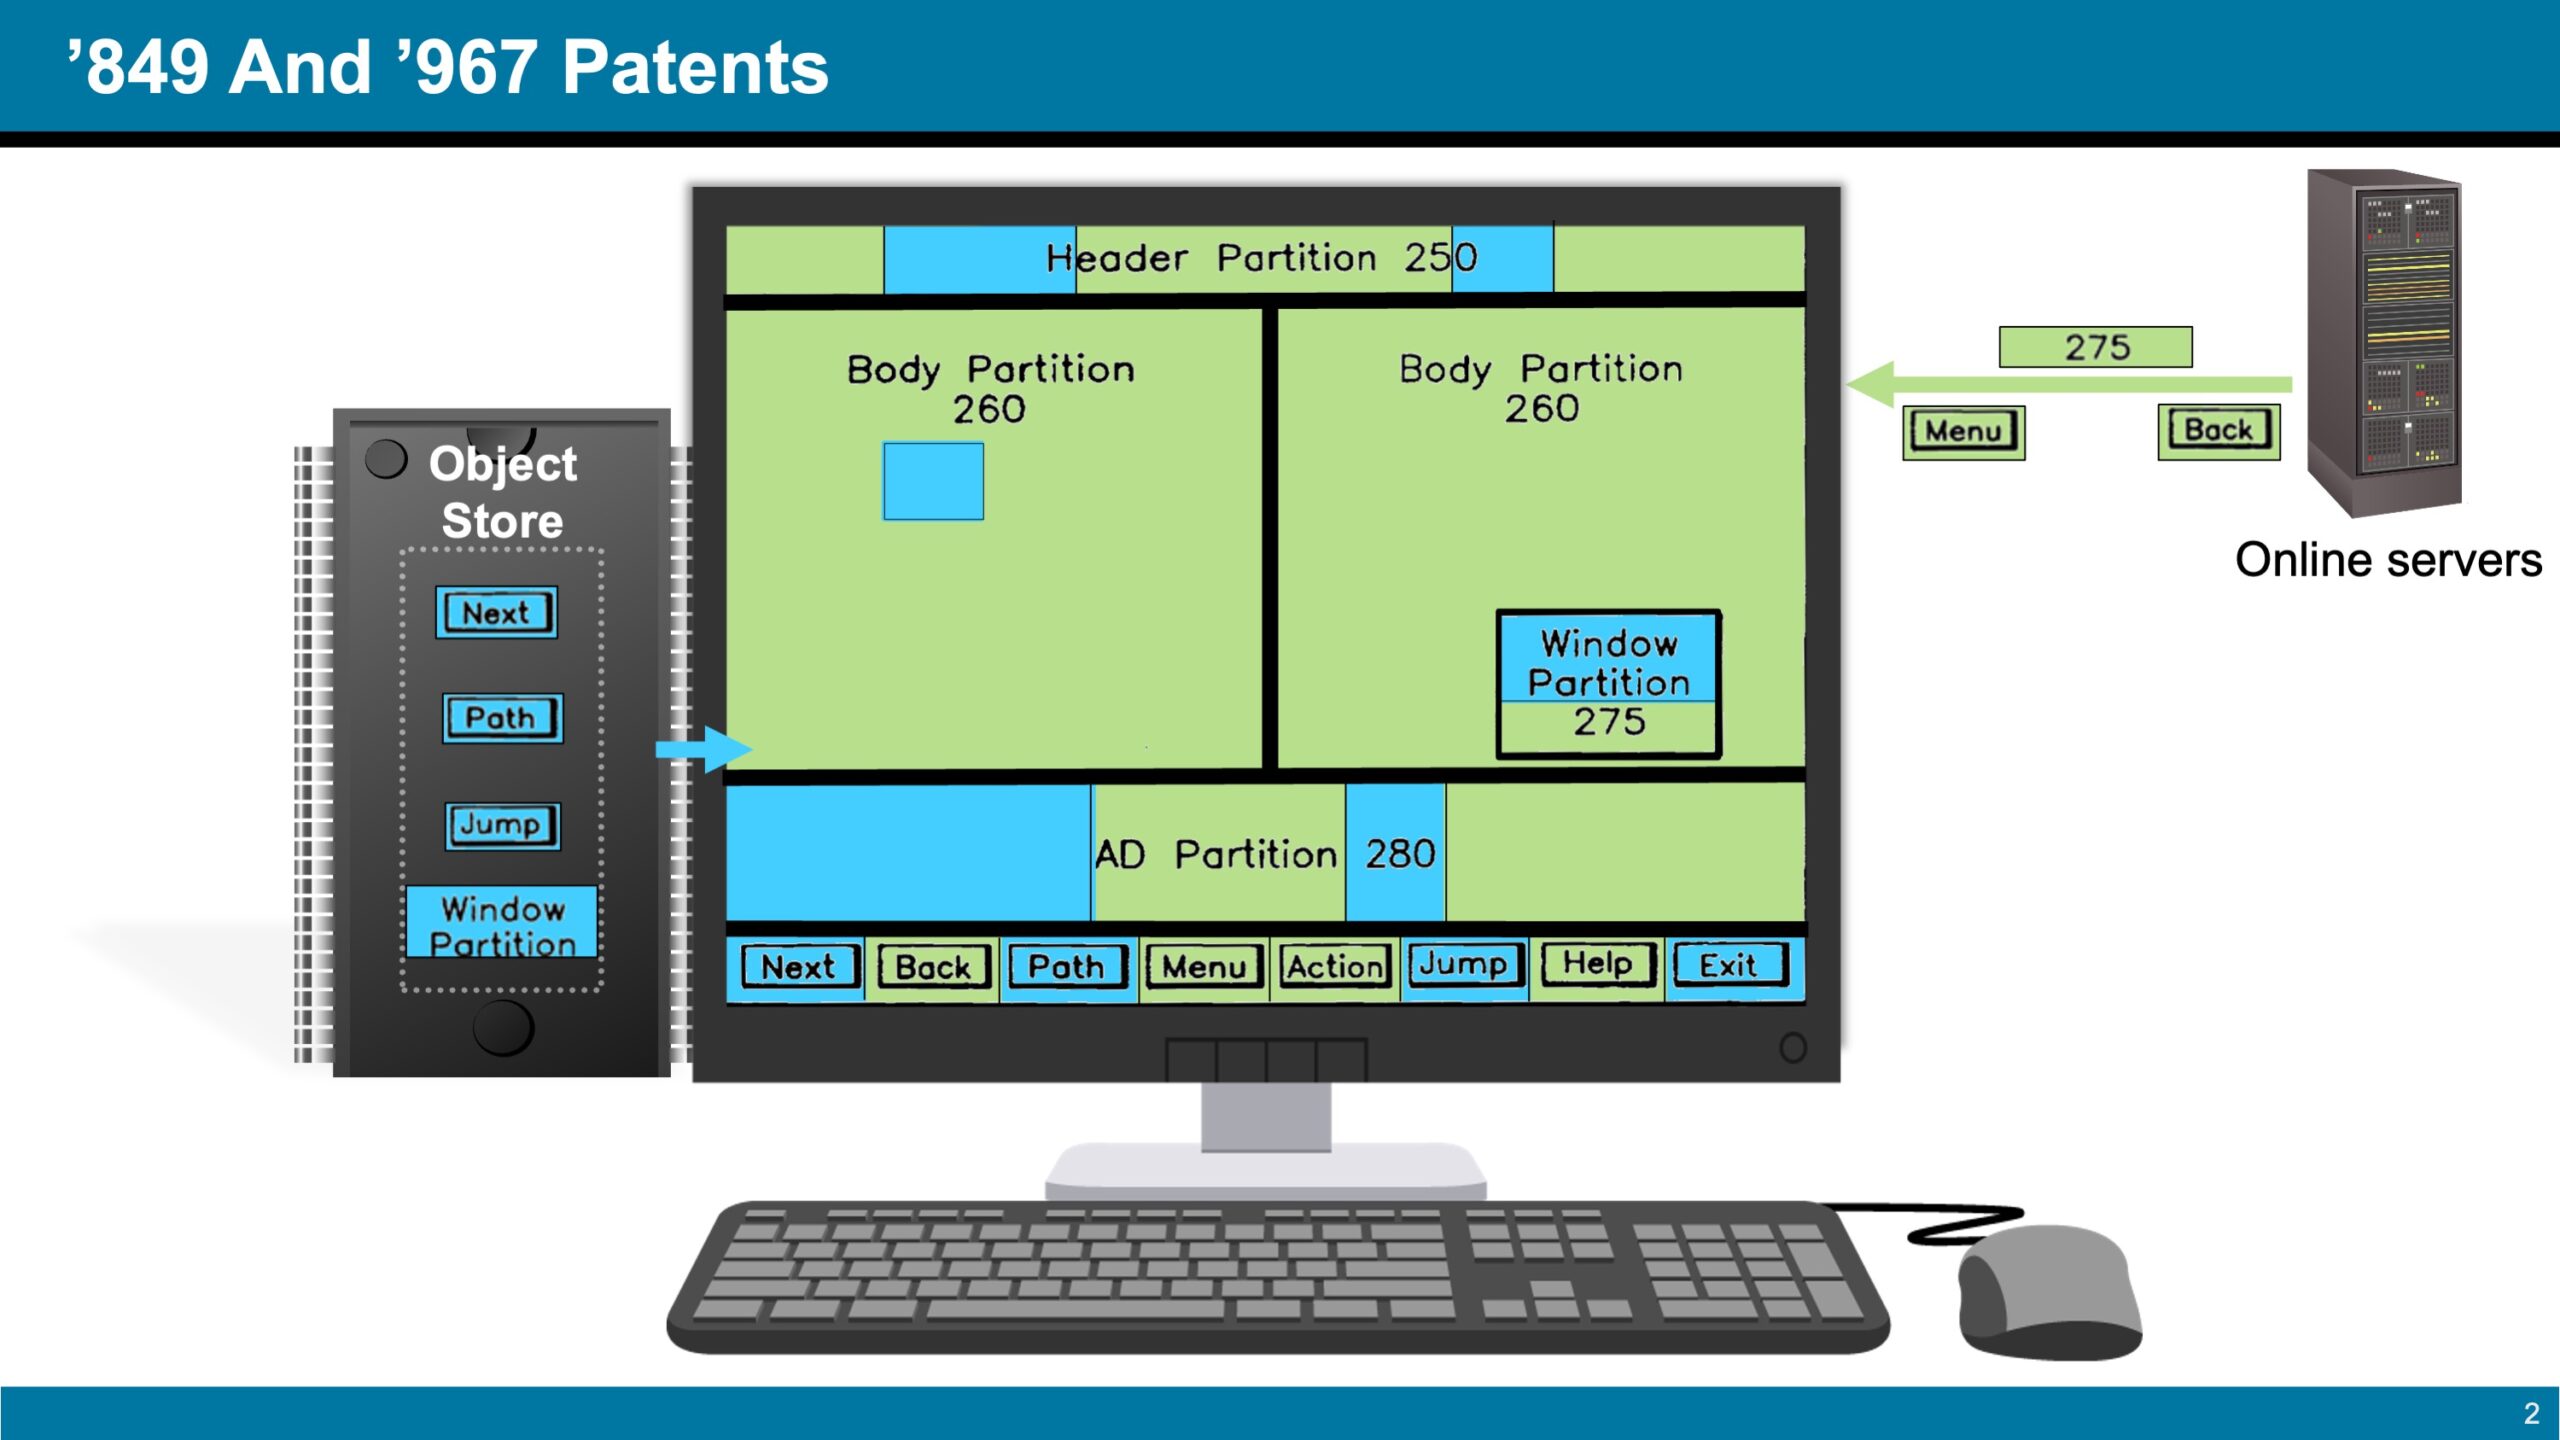 Slide presentation showing '849 and '967 patents